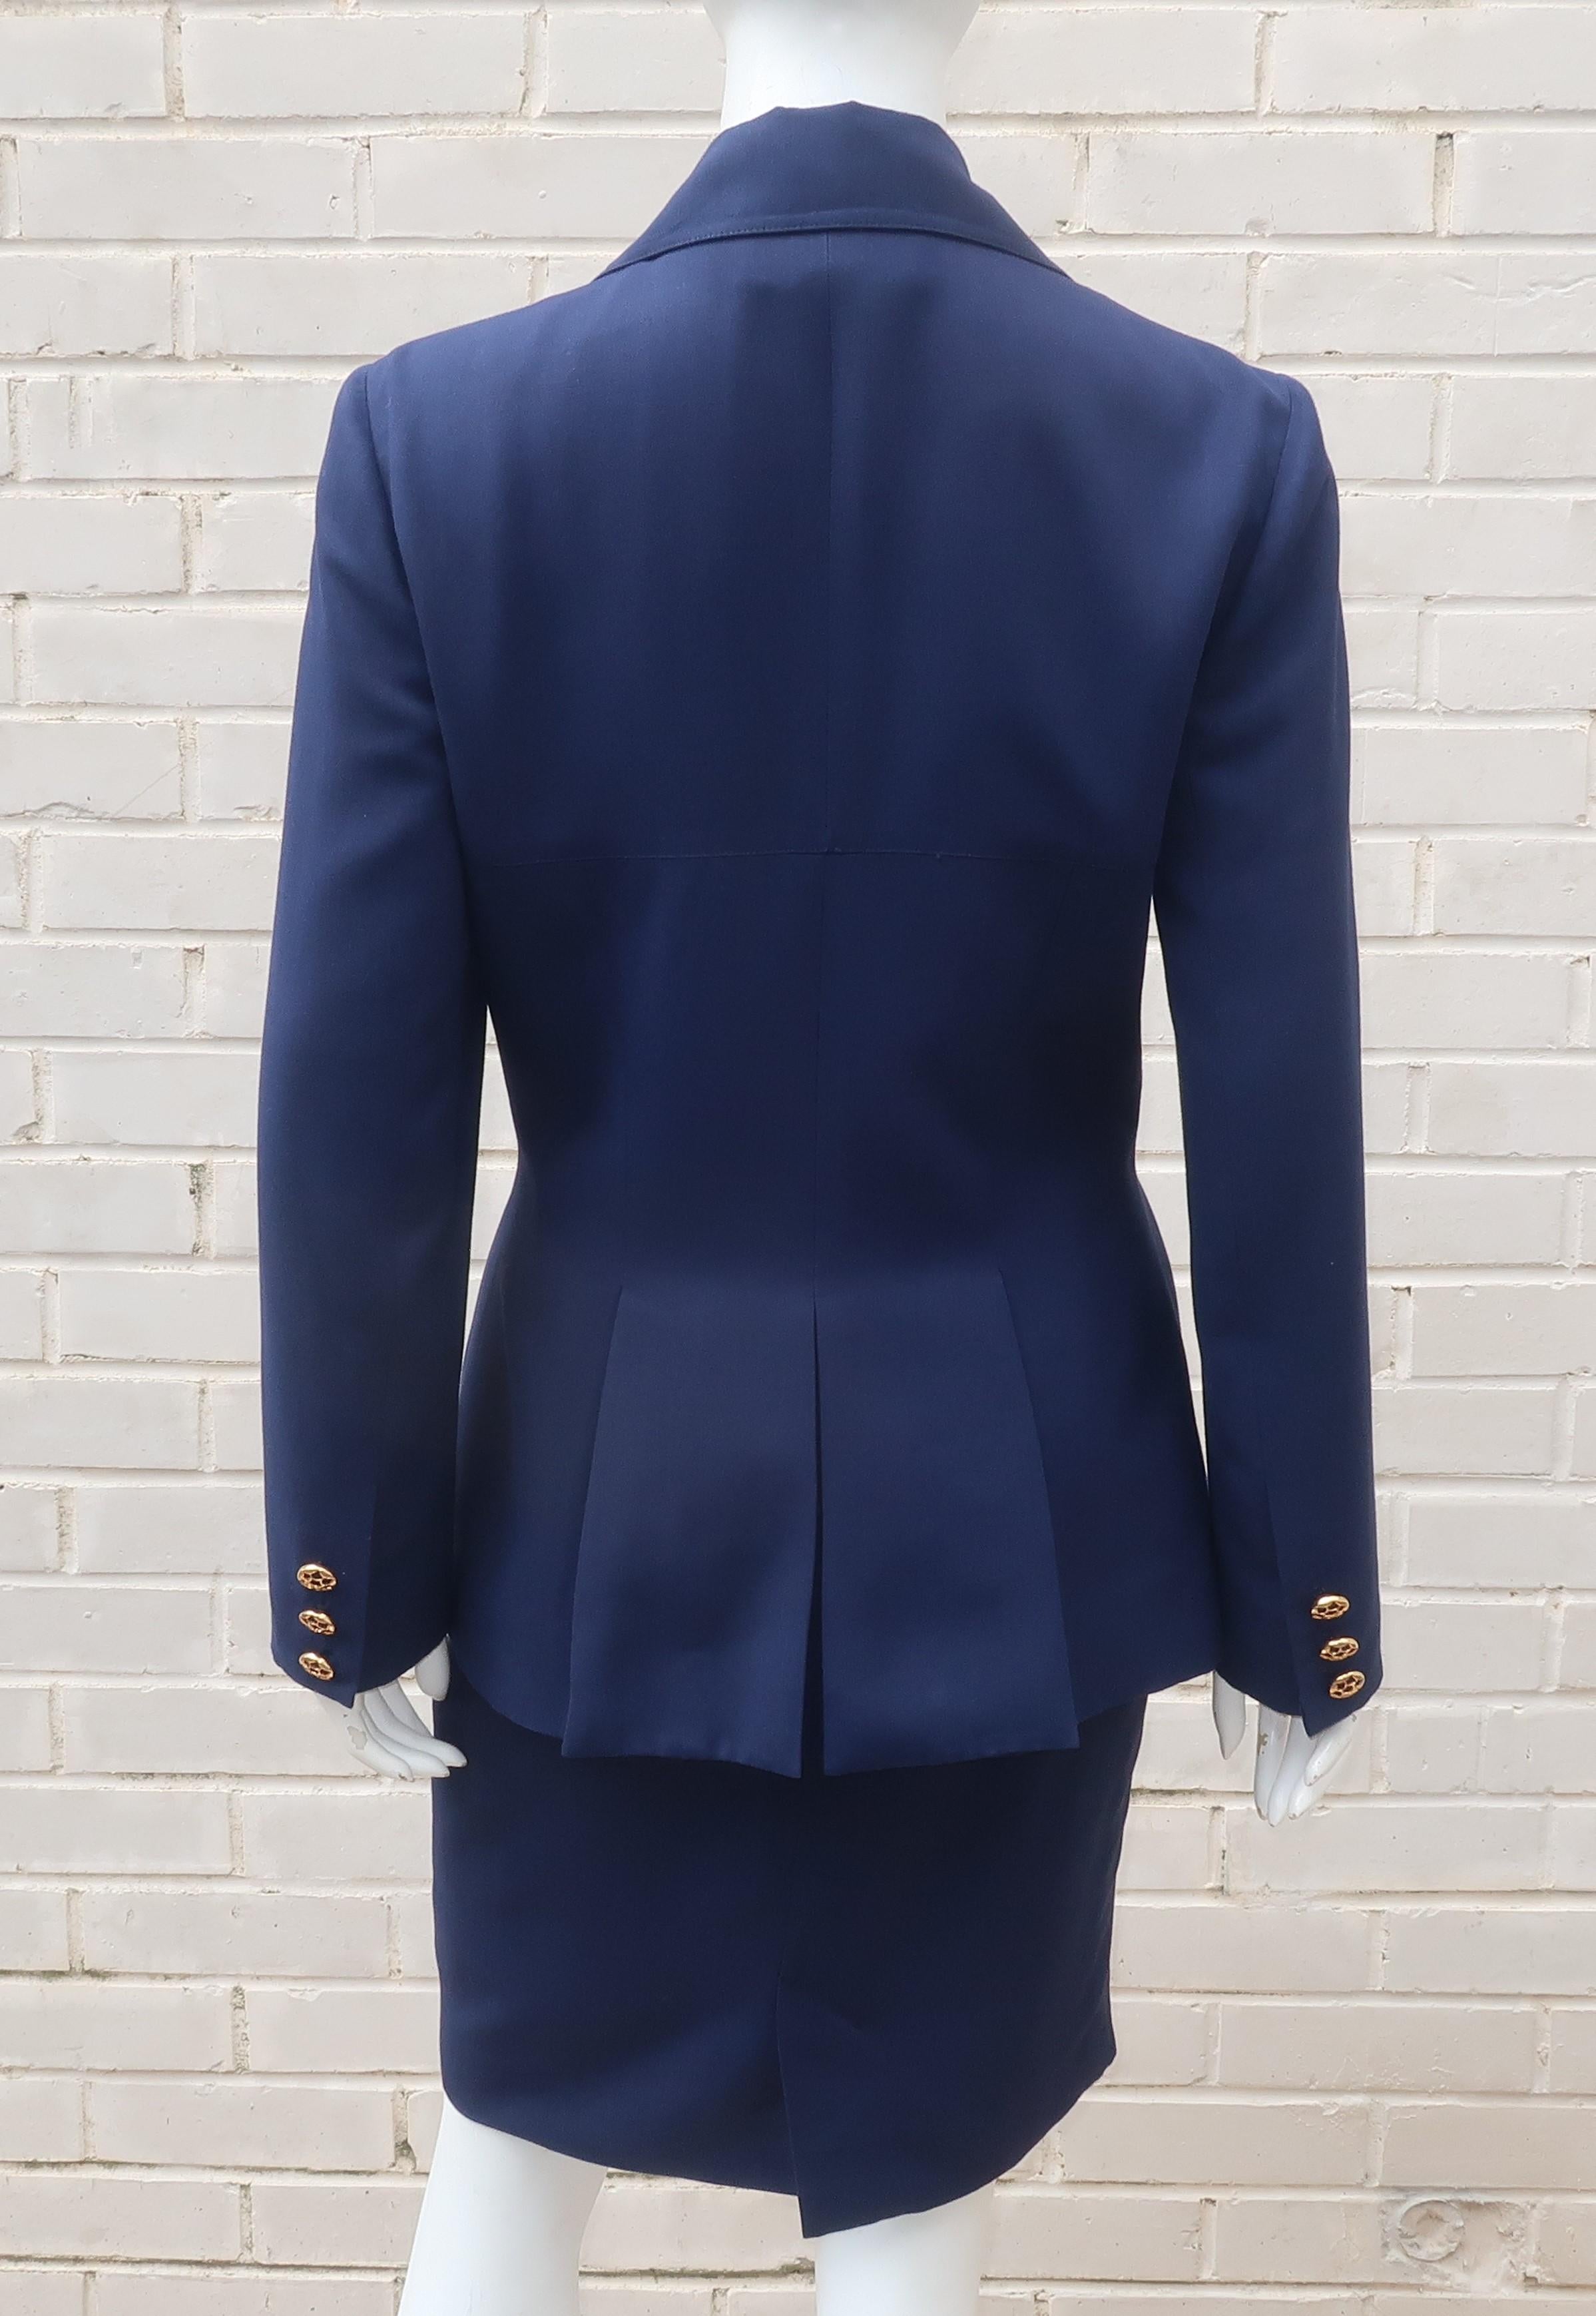 Women's Karl Lagerfeld Navy Blue Skirt Suit With Gold Buttons